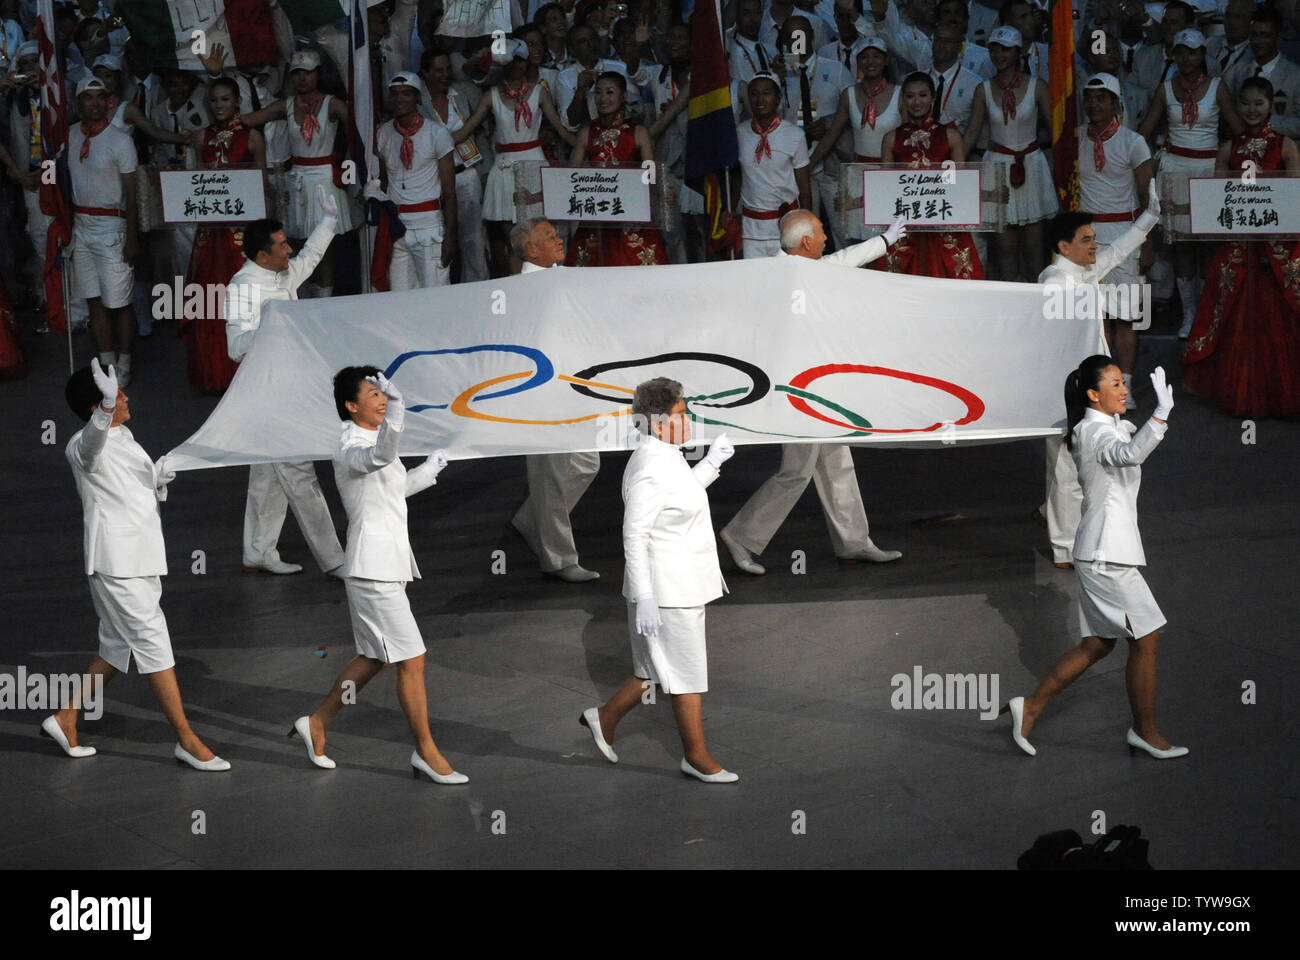 The Olympic Flag is carried into National Stadium, called the Bird's Nest, during the Opening Ceremony of the 2008 Summer Olympics in Beijing on August 8, 2008.   The Summer Games will run through August 24, 2008.   (UPI Photo/Pat Benic) Stock Photo